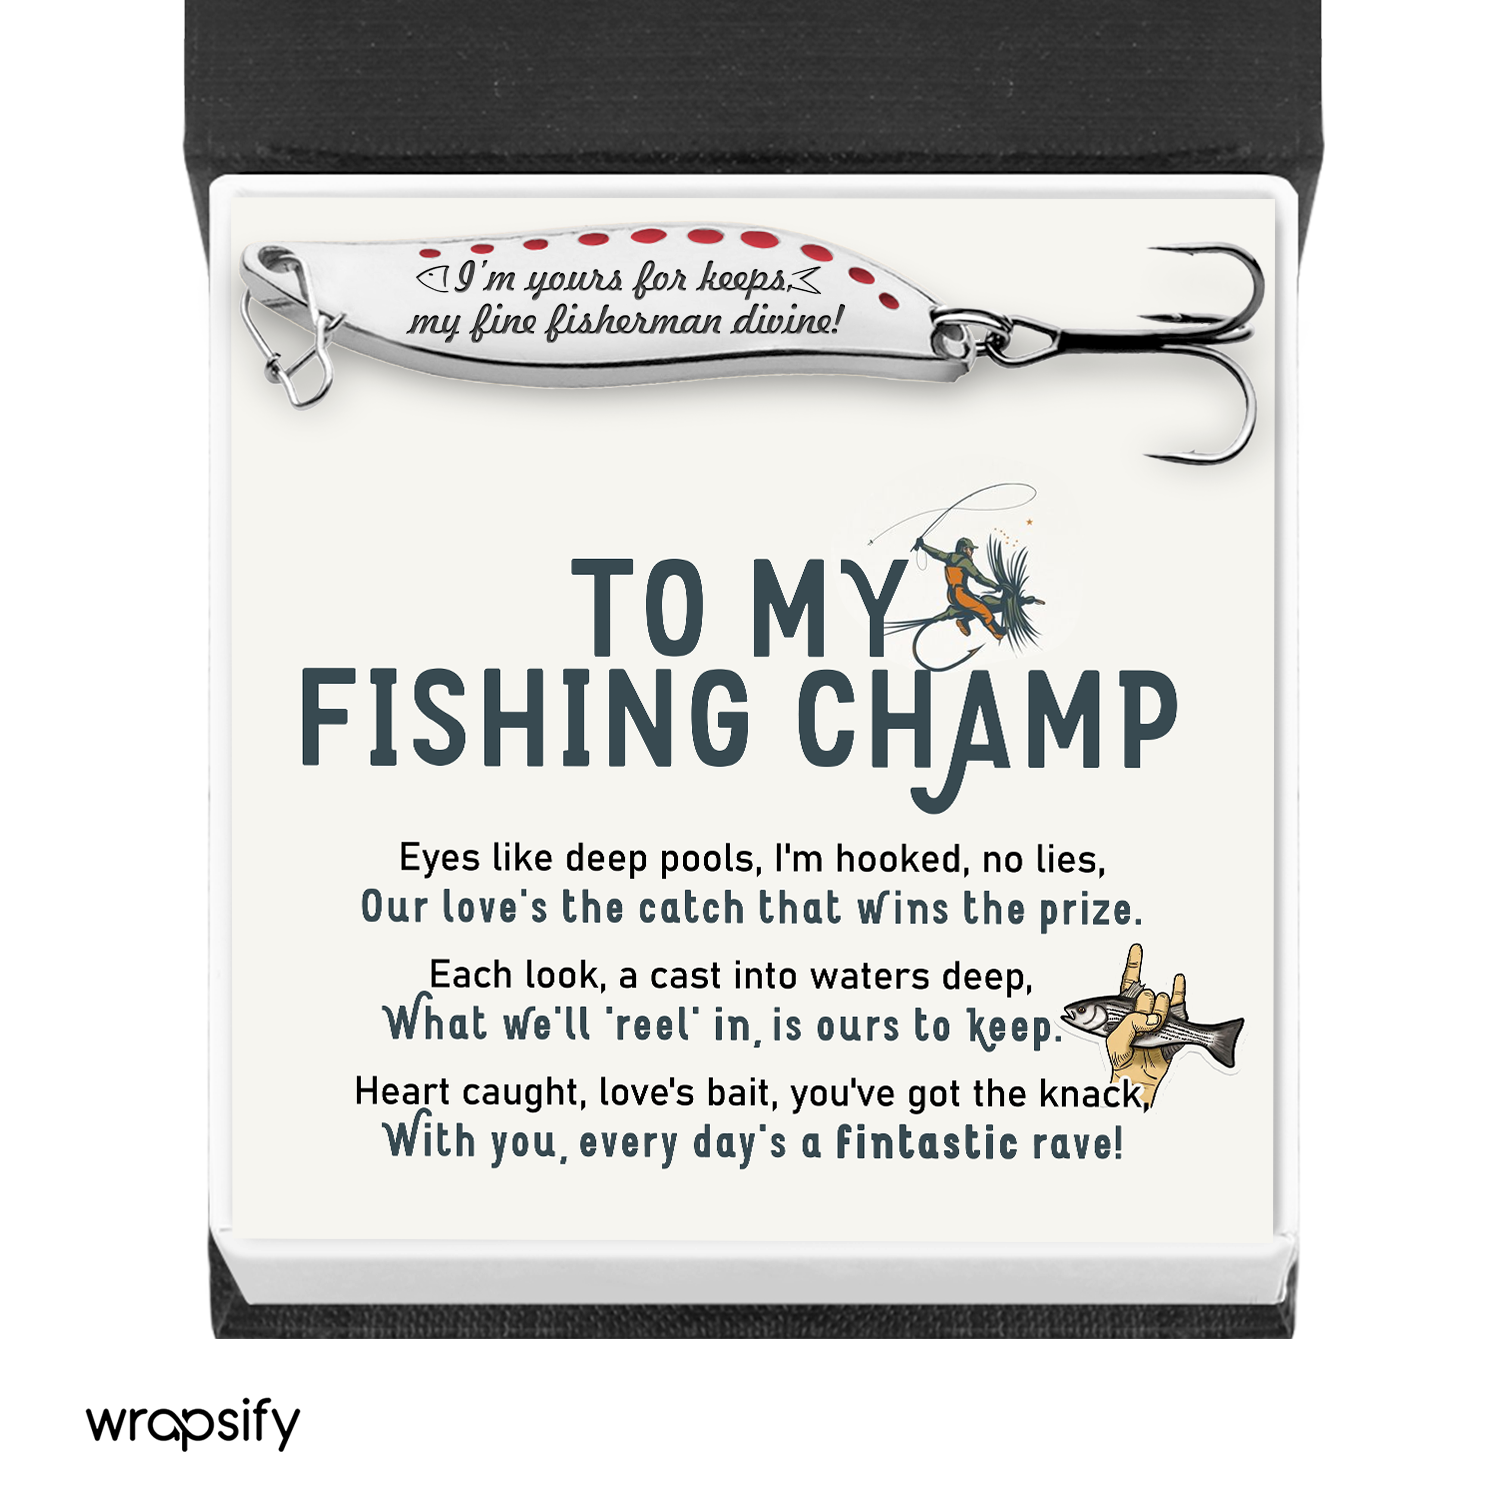 Fishing Spoon Lure - Fishing - To My Man - Our Love's The Catch That Wins The Prize - Gfaa26012